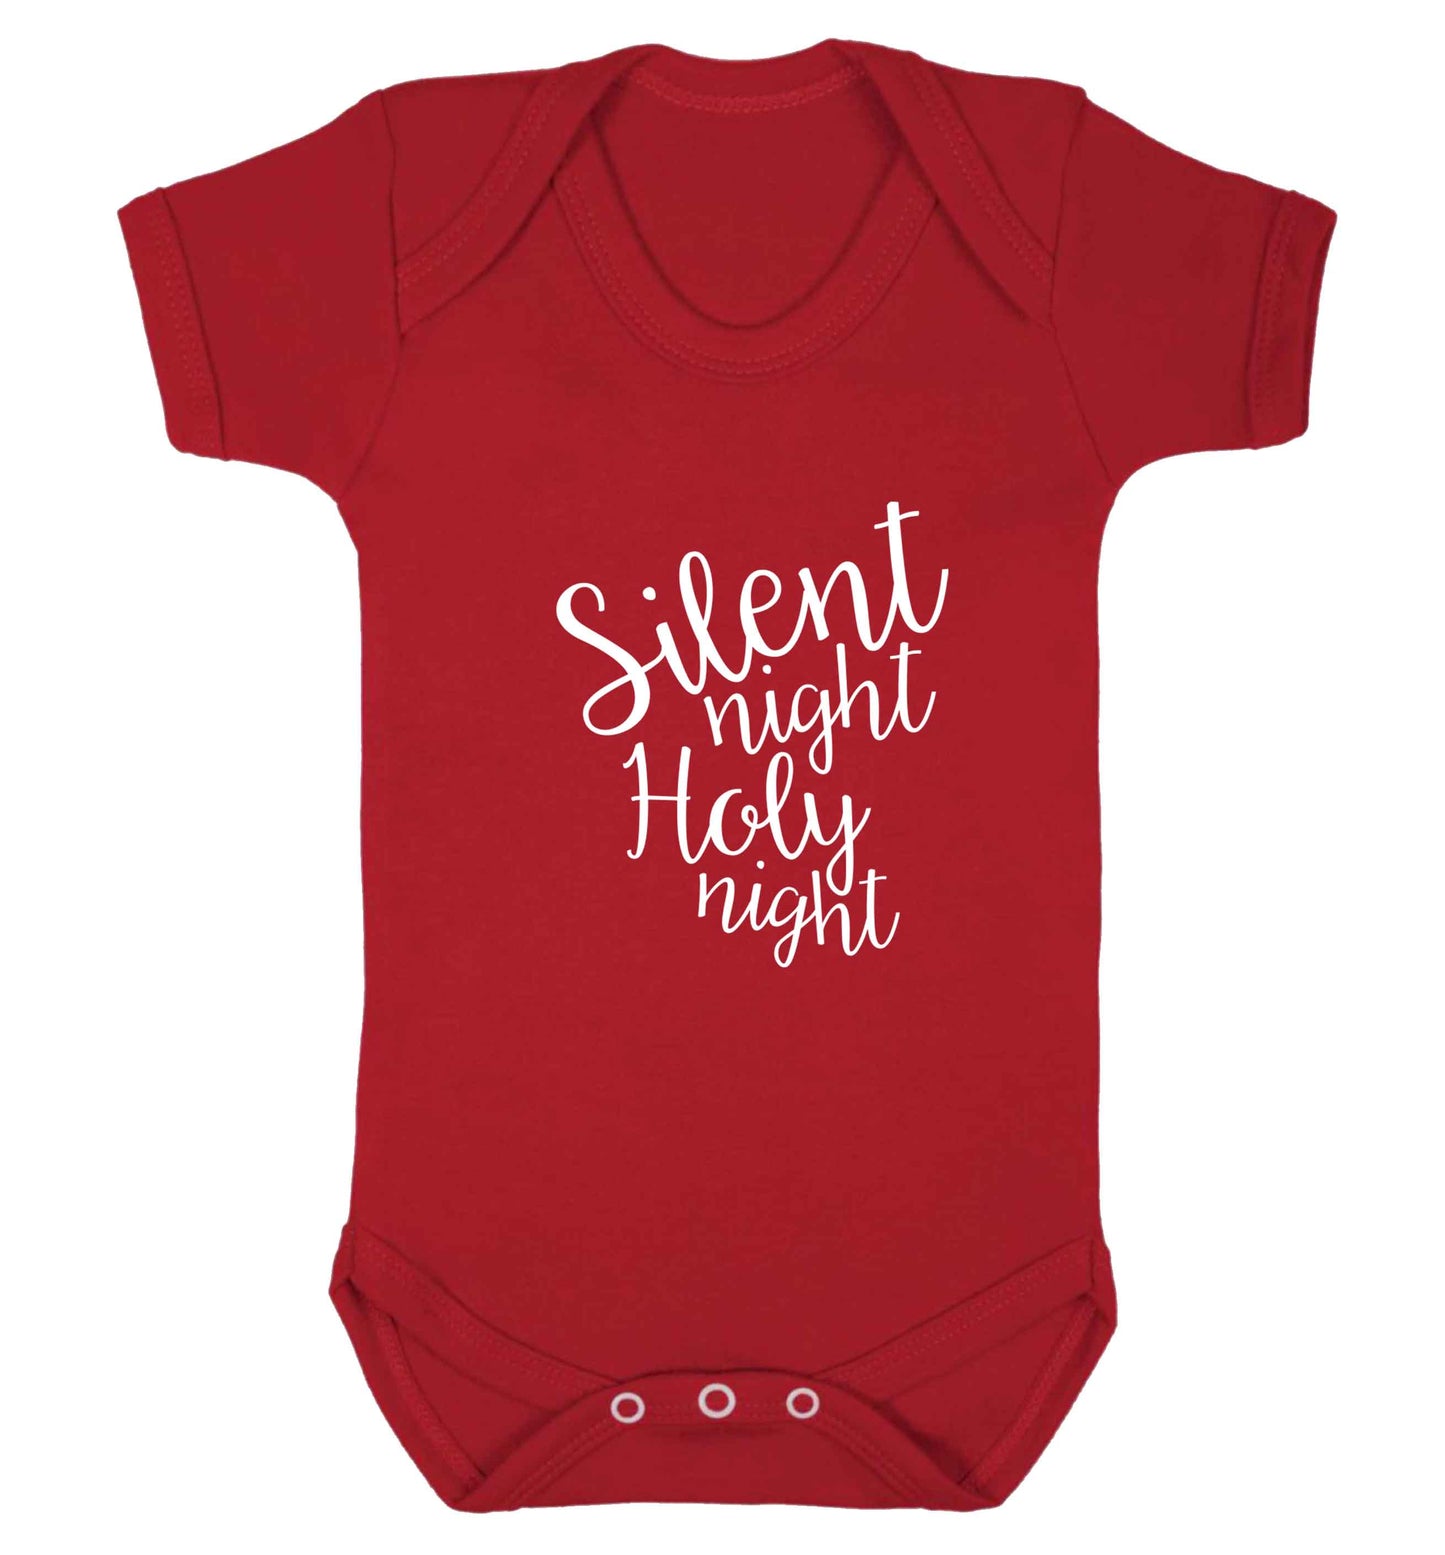 Silent night holy night baby vest red 18-24 months